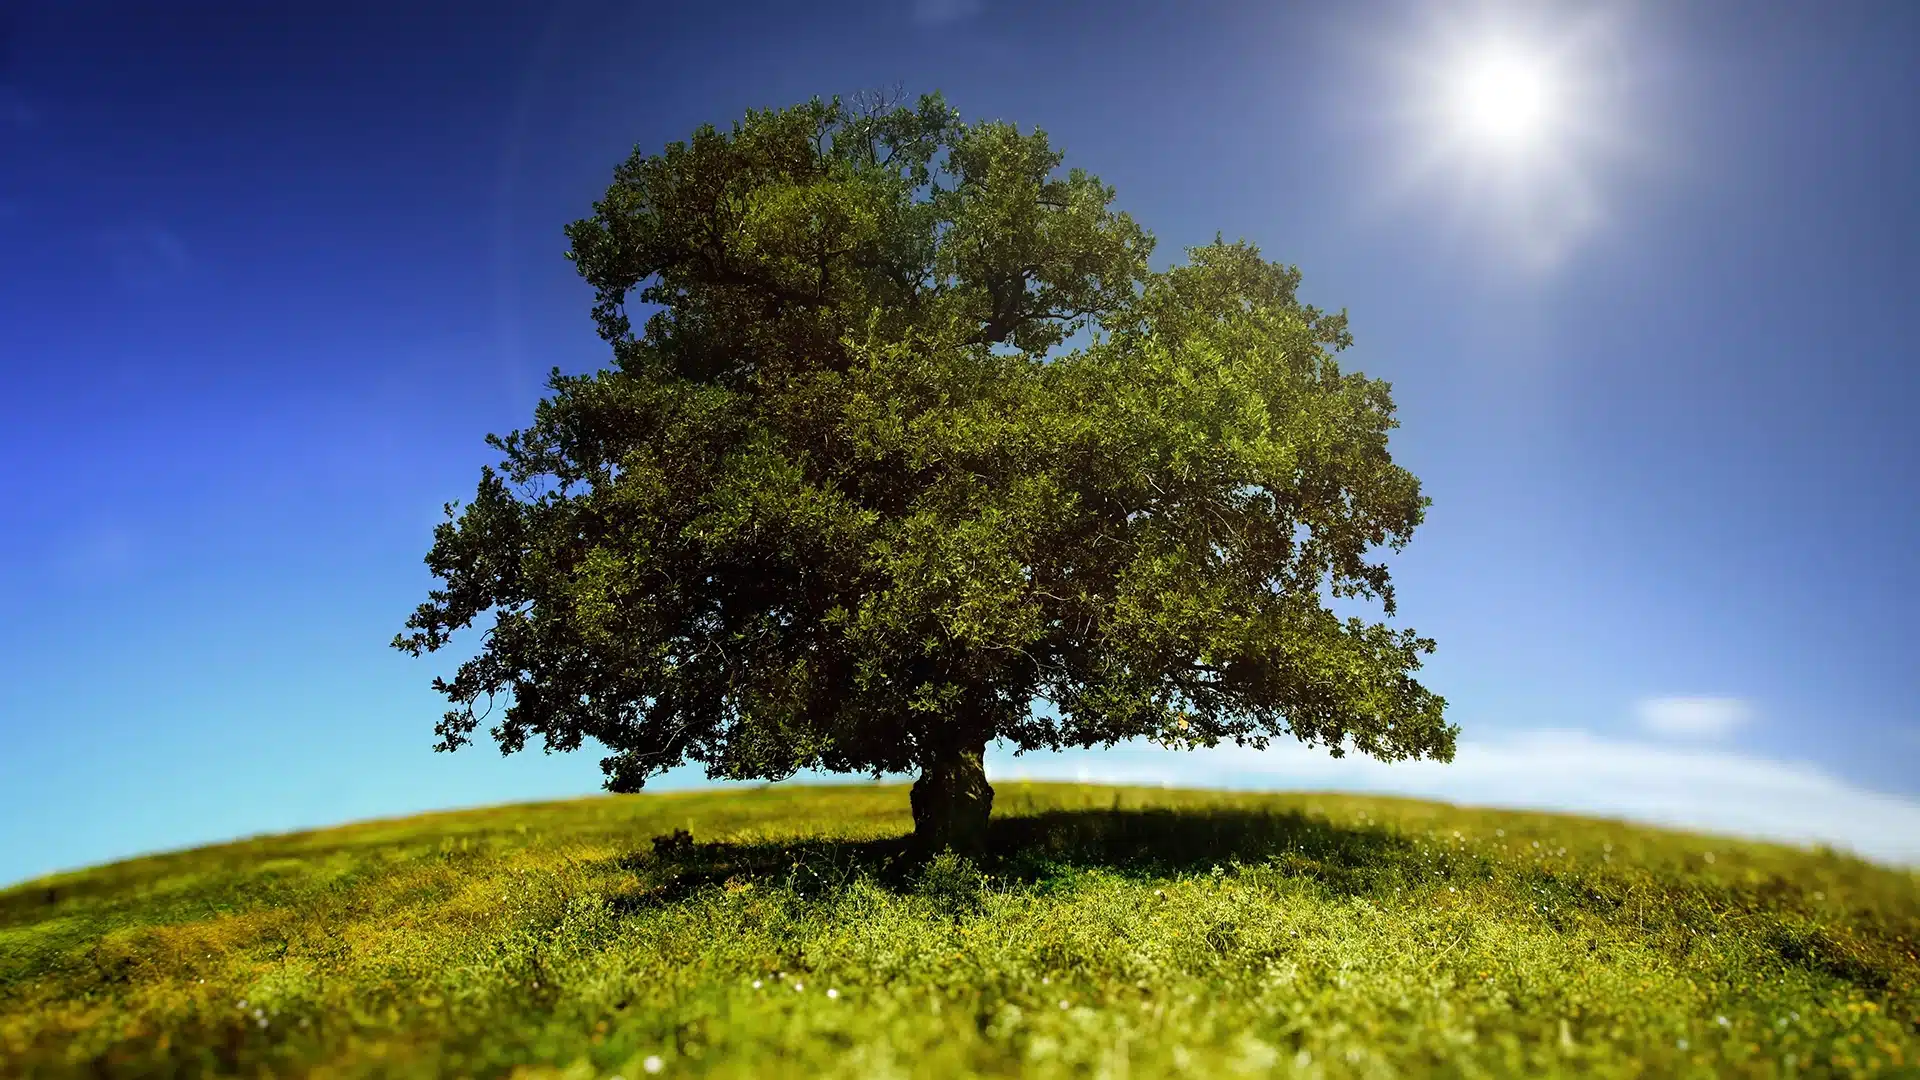 nature scene of a tree on a hill with the sun shining